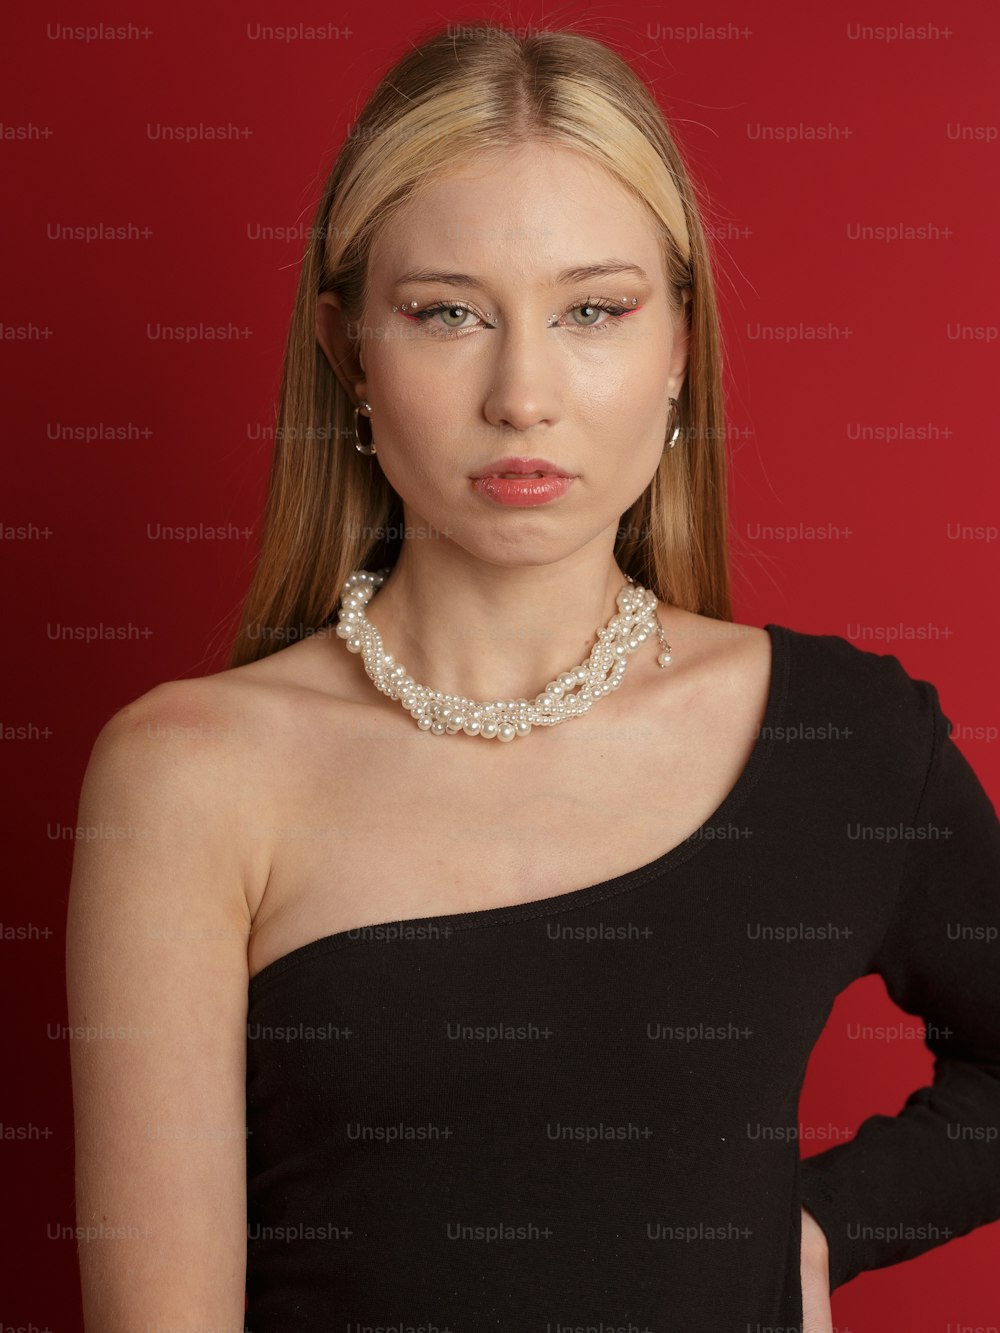 a woman in a black dress wearing a necklace